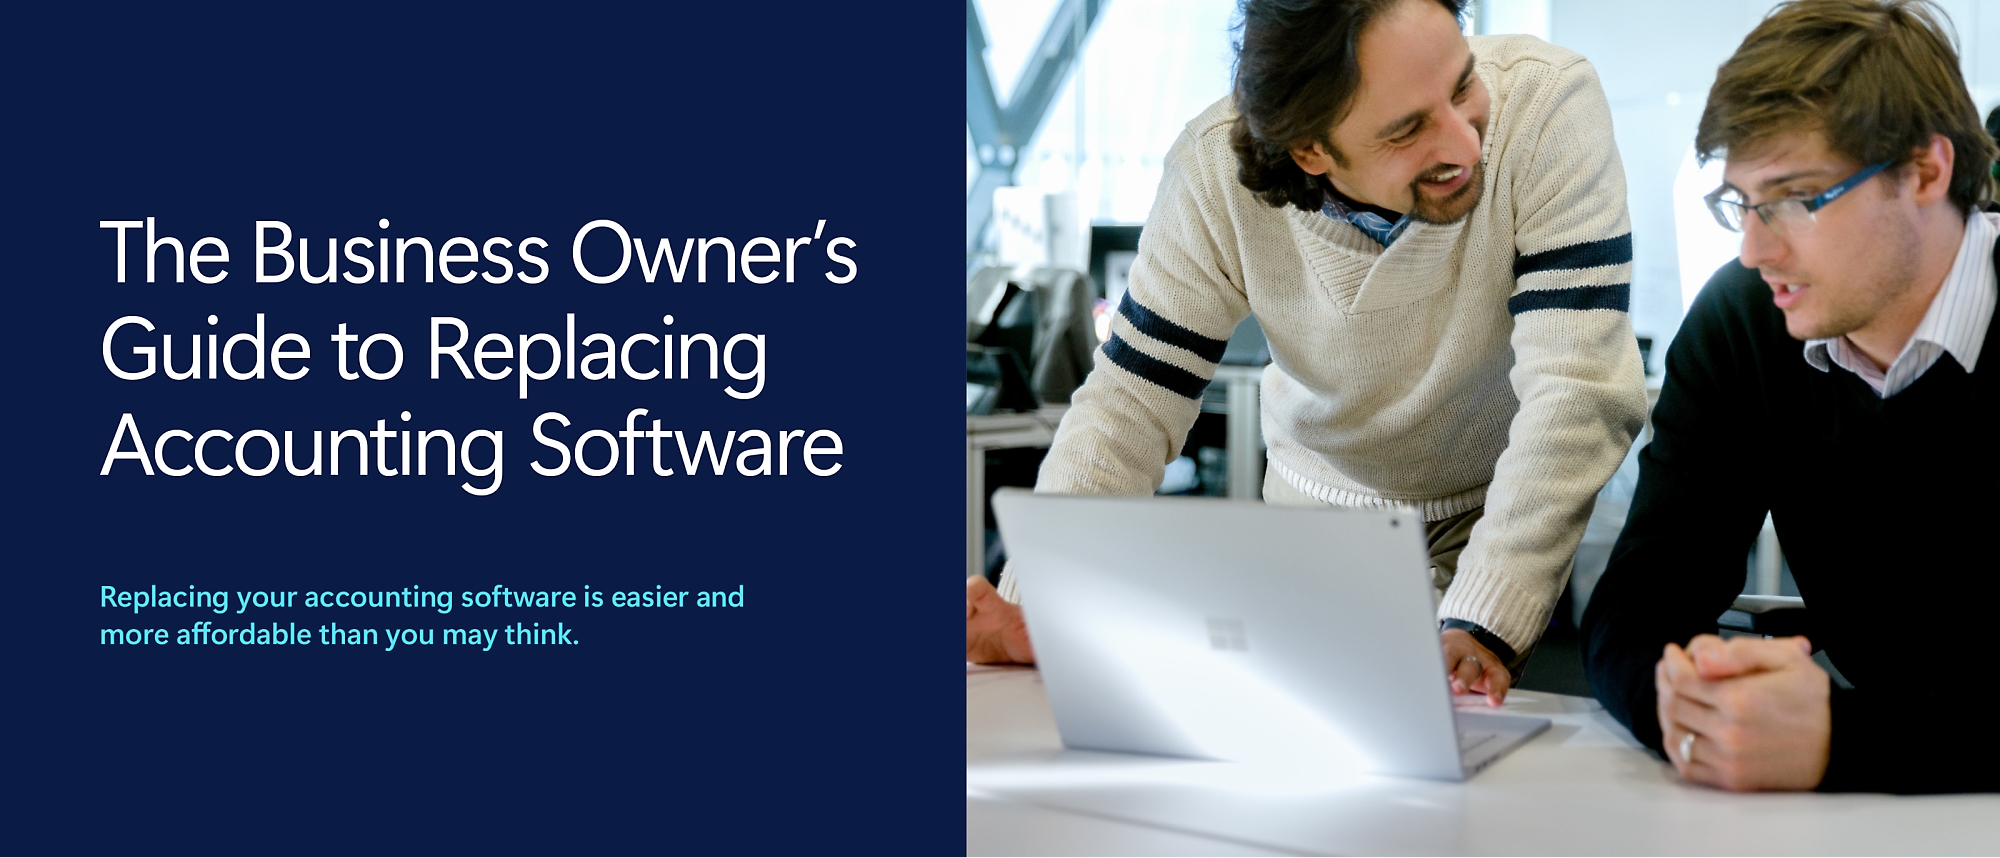 The Business Owner's Guide to Replacing Accounting Software